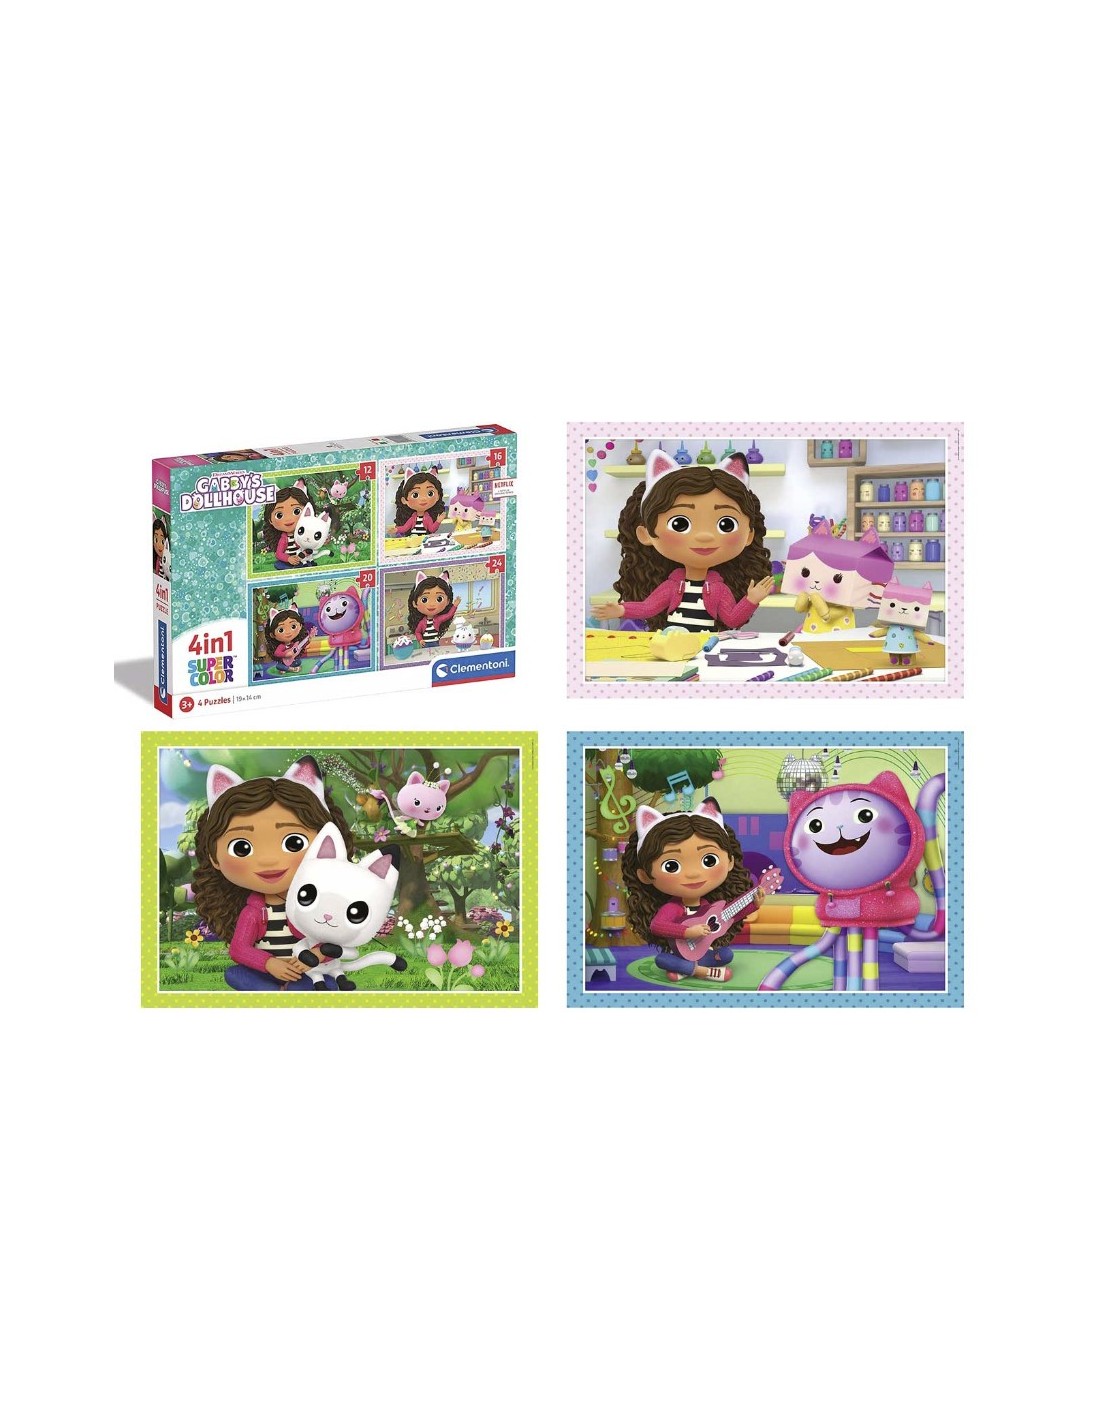 Clementoni 4in1 Puzzle Gabby's Dollhouse 21524